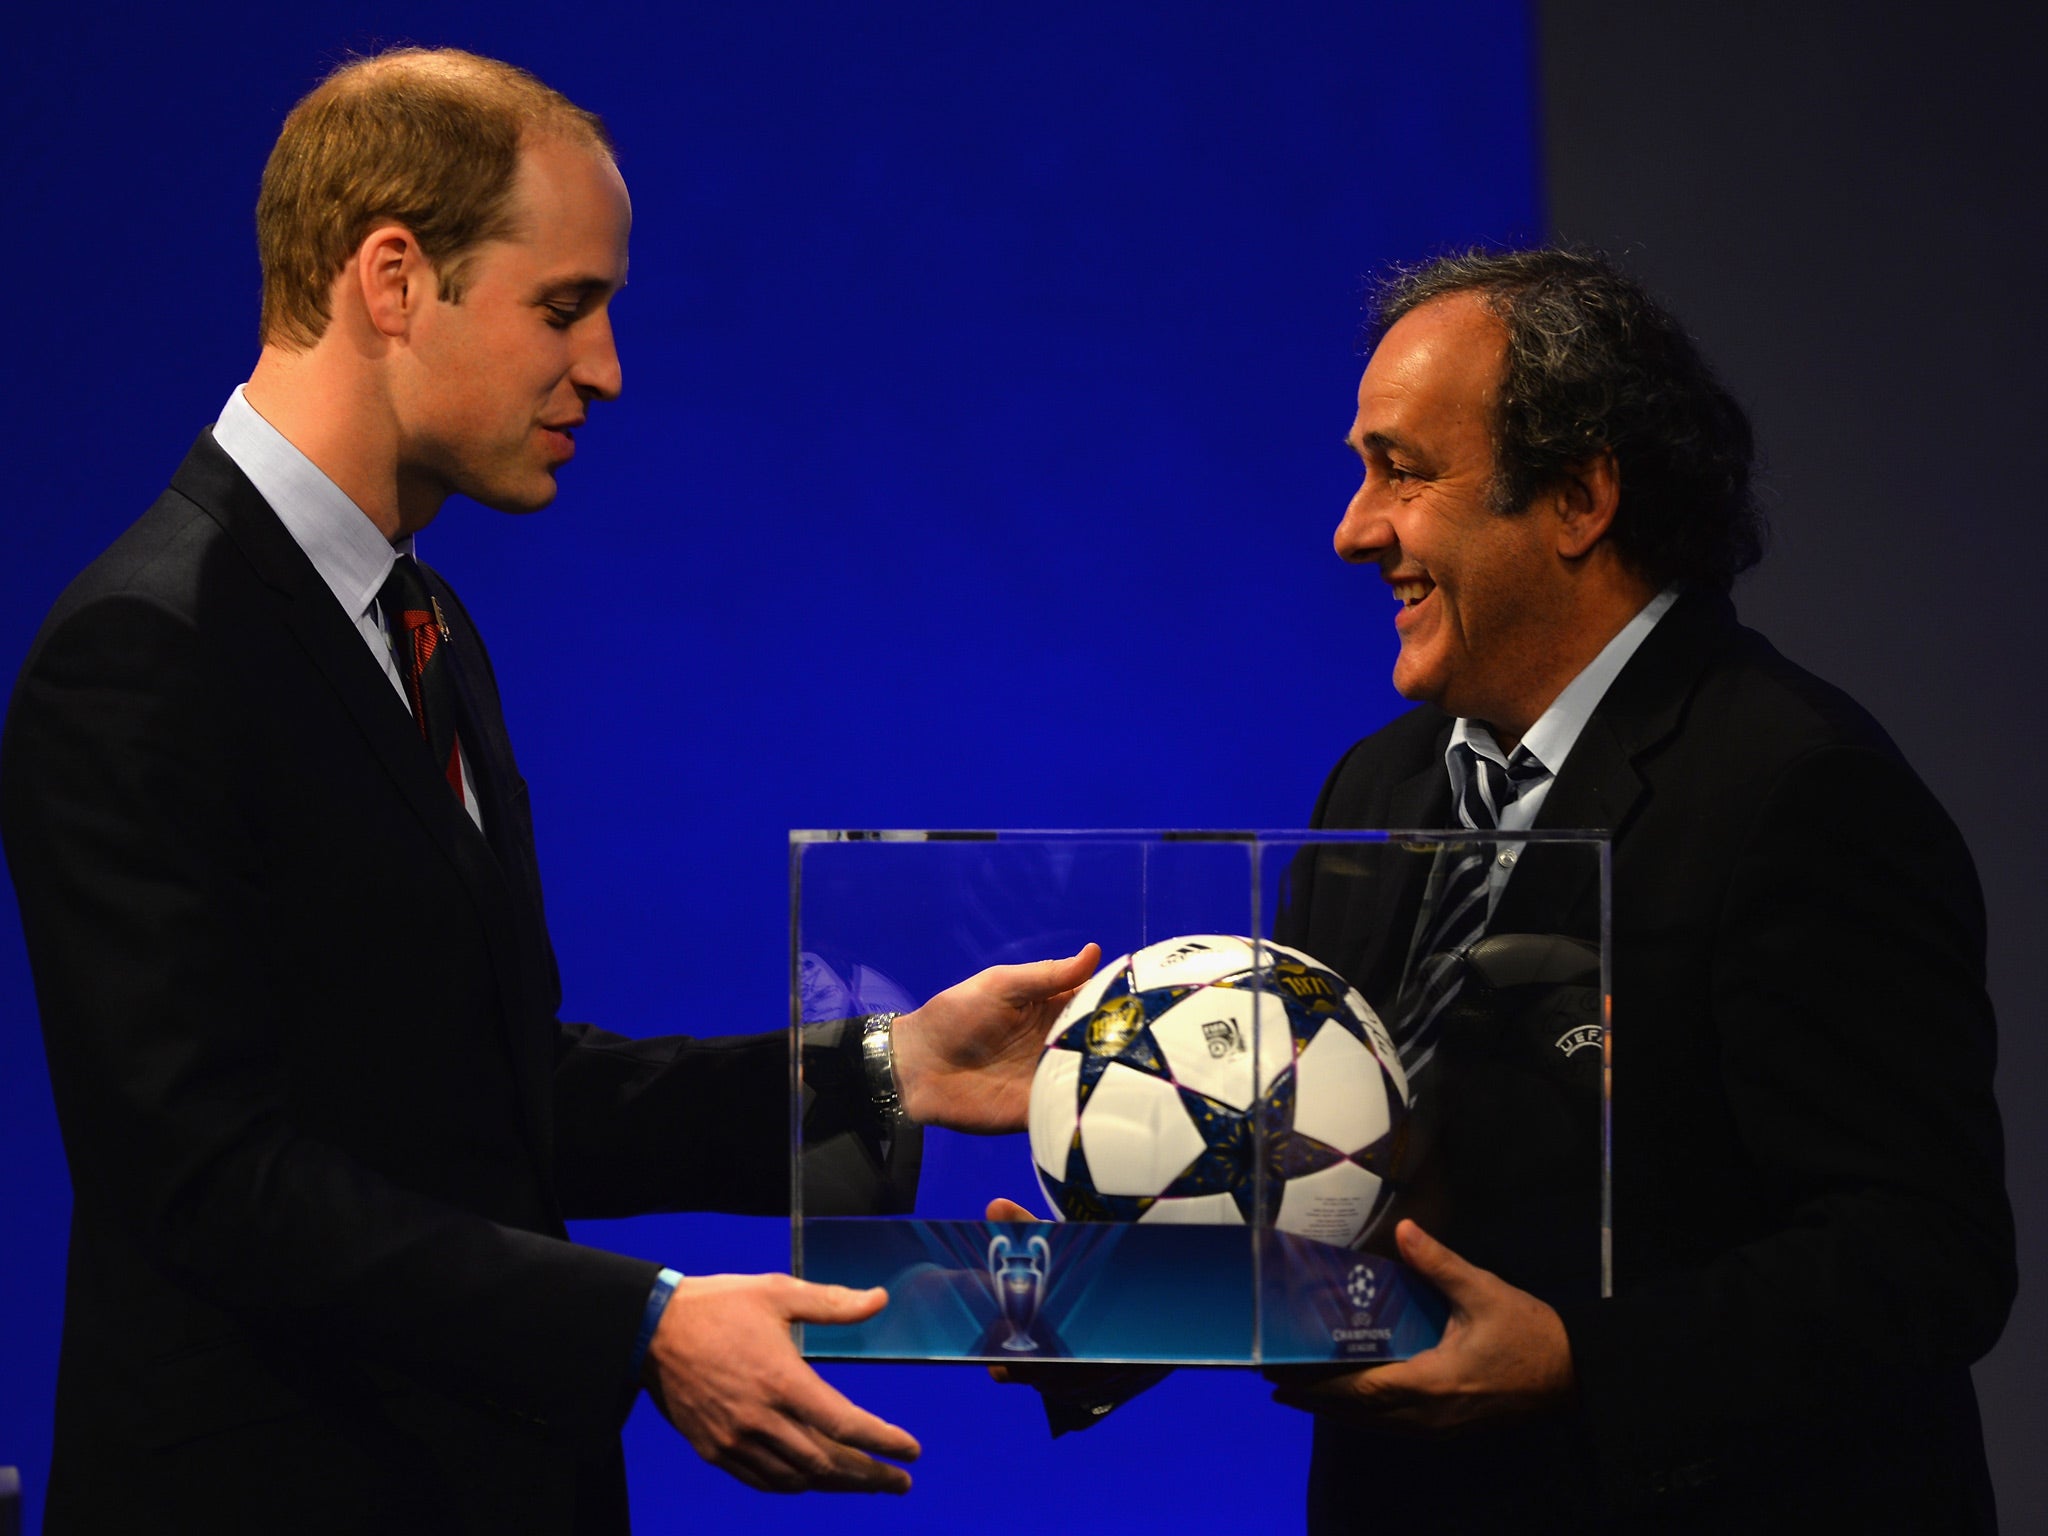 President of The FA Prince William, Duke of Cambridge is presented a match ball by UEFA President Michel Platini